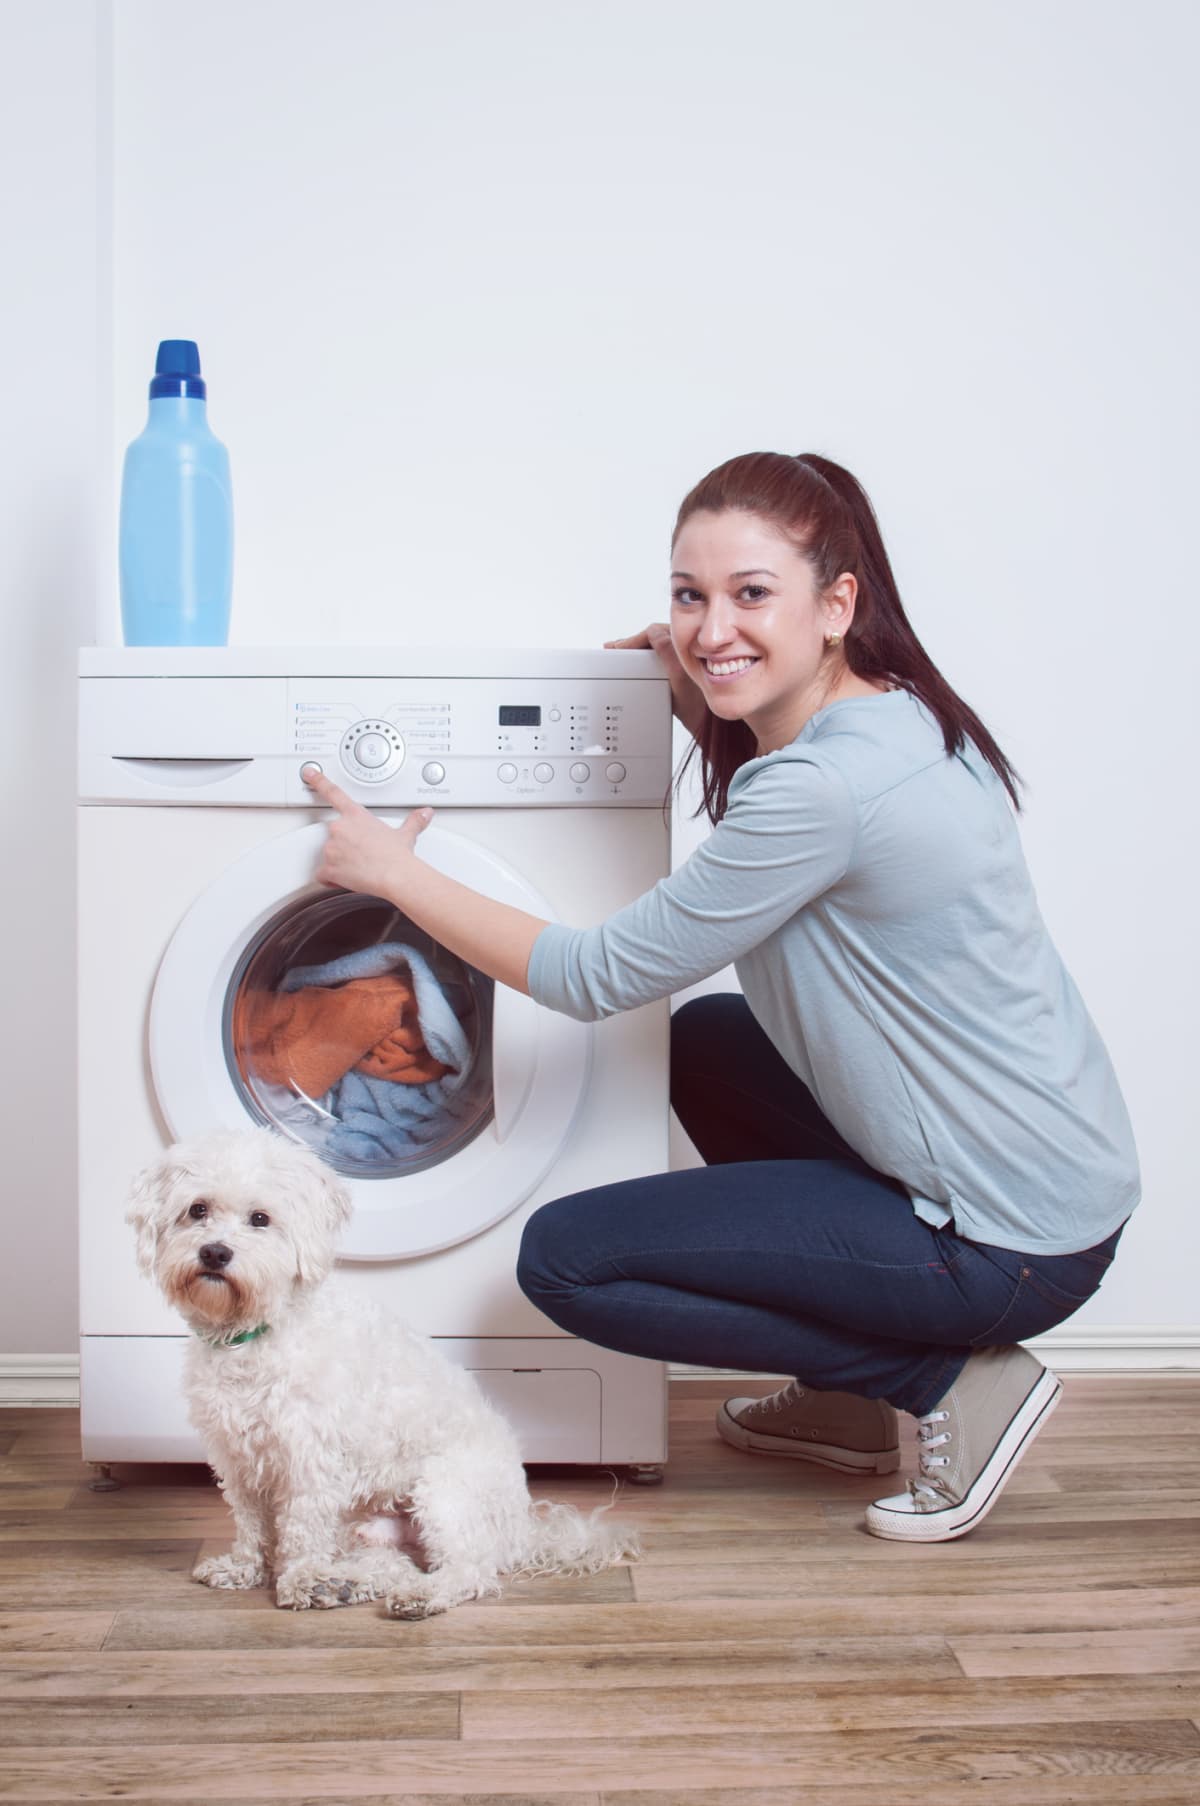 A woman using a washing machine, with her dog sitting nearby